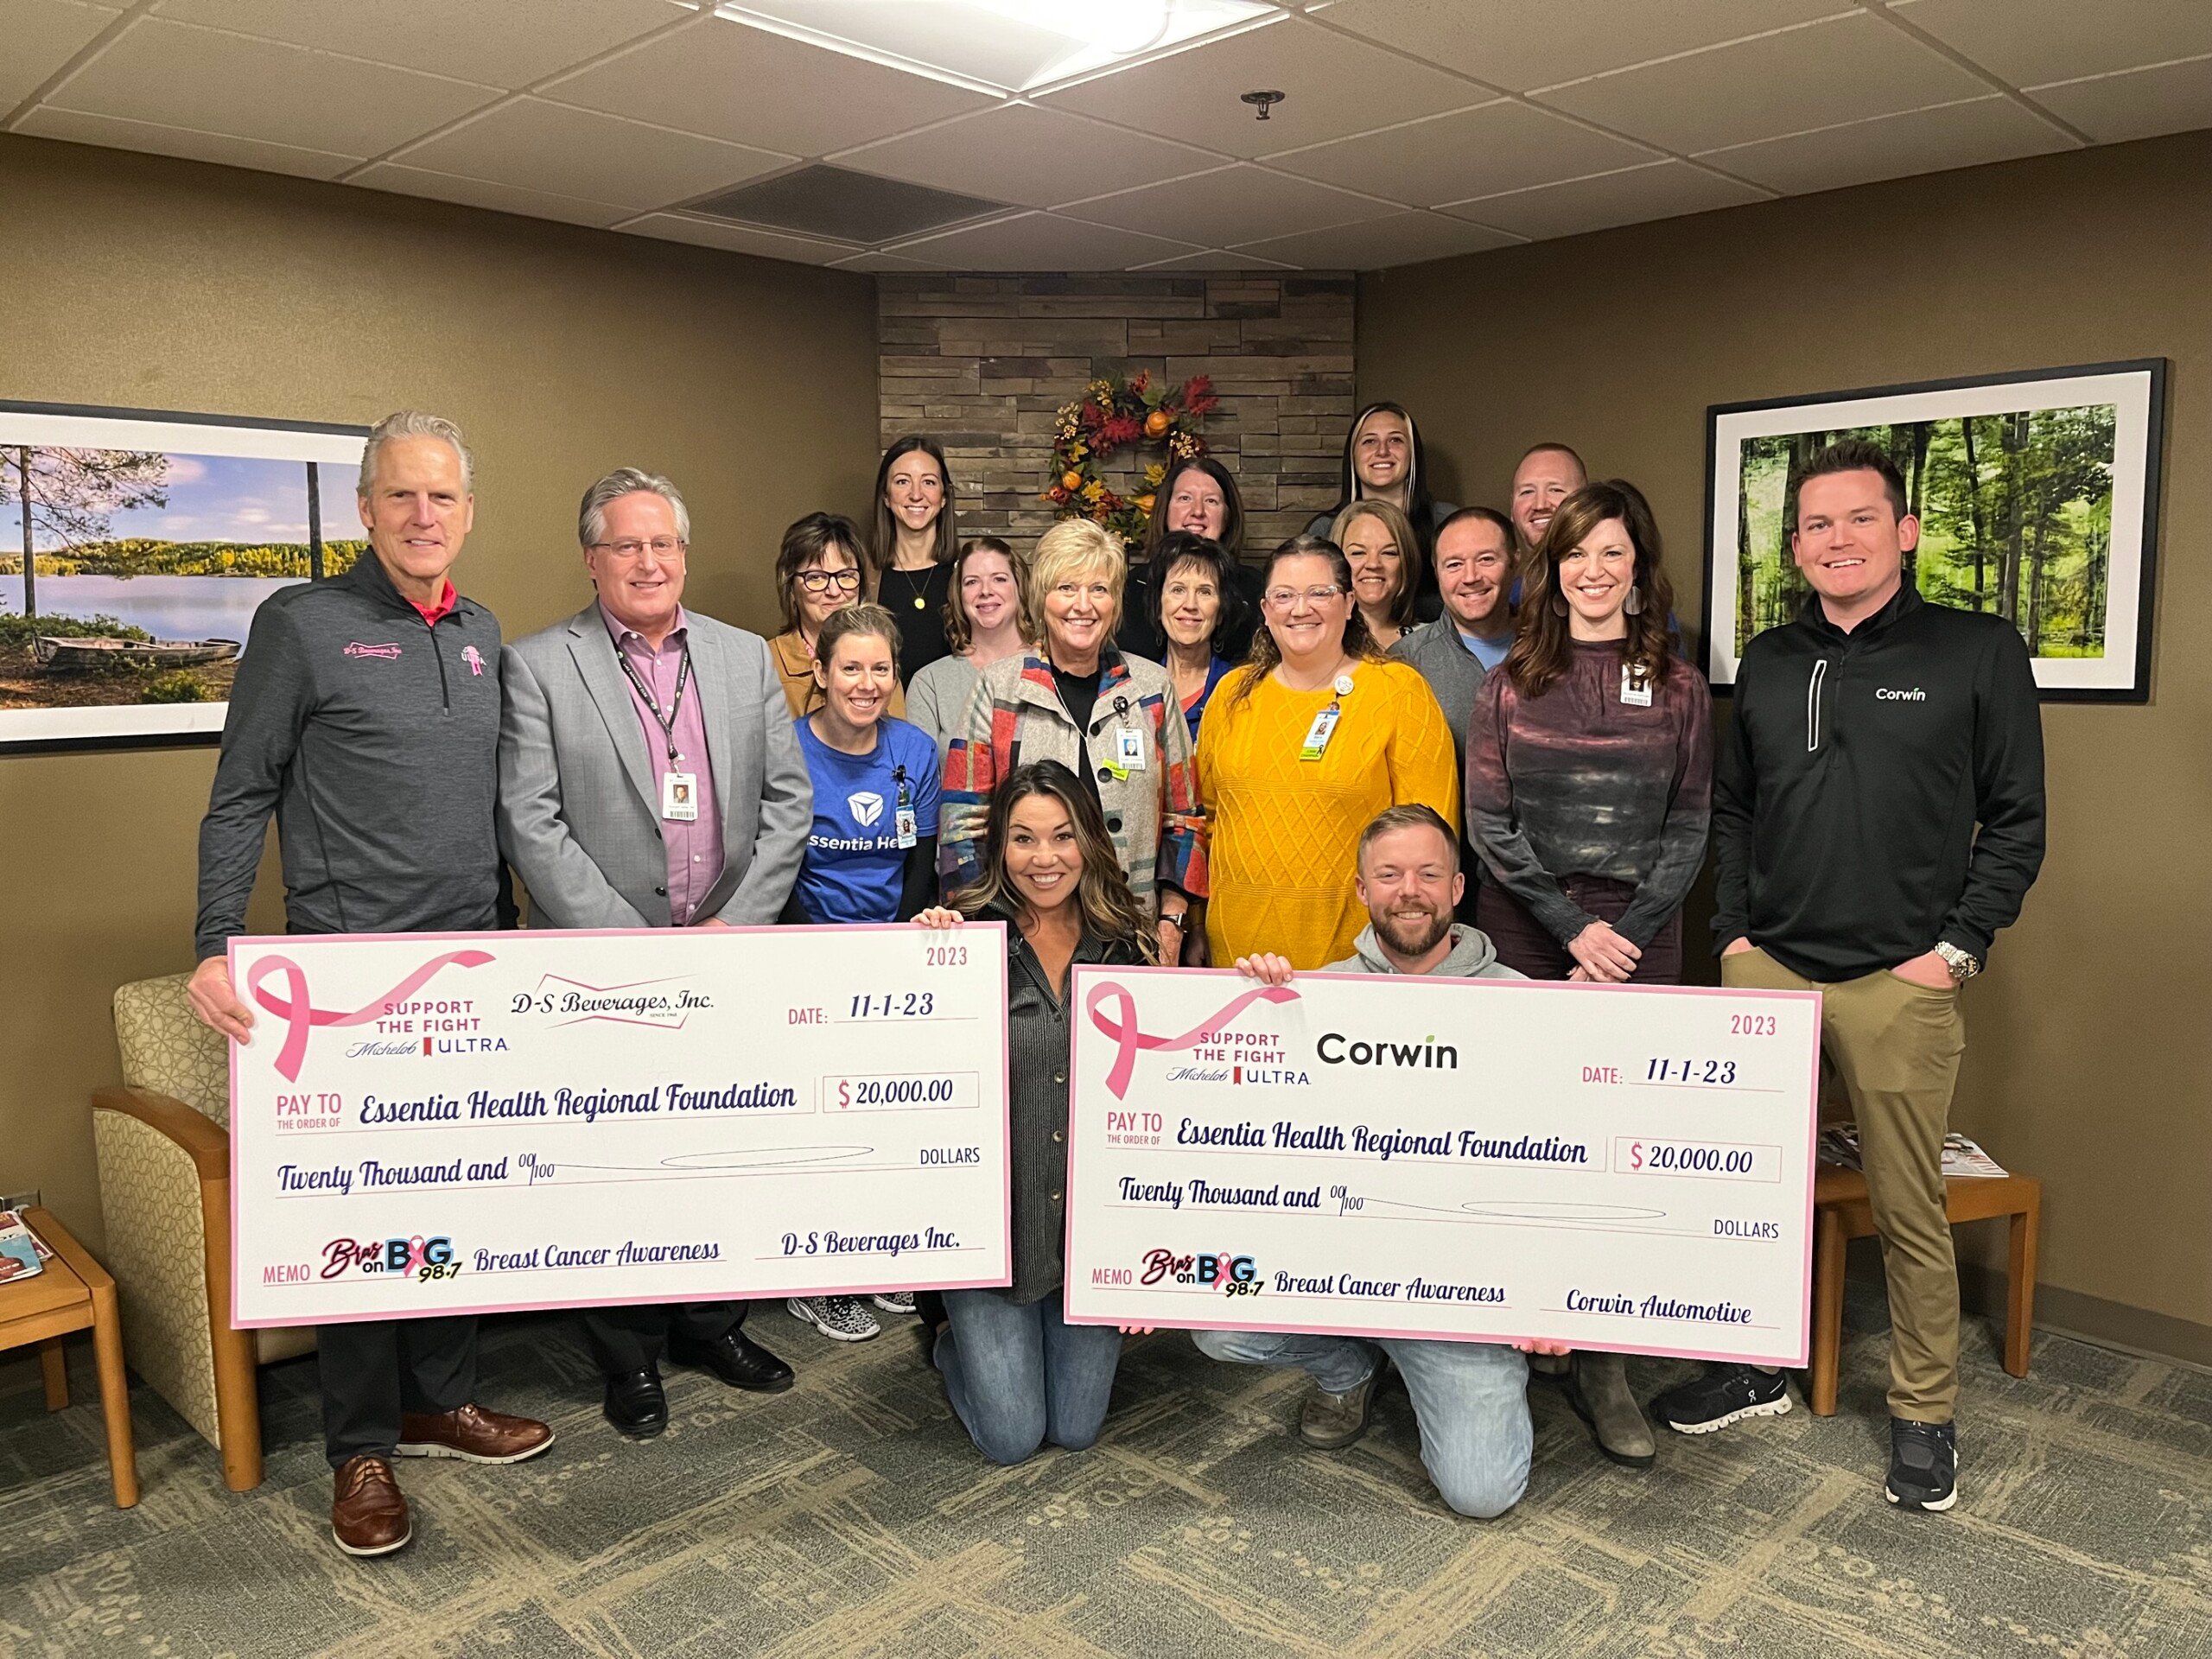 Bras on Big 98.7' campaign results in $40,000 for Essentia Health